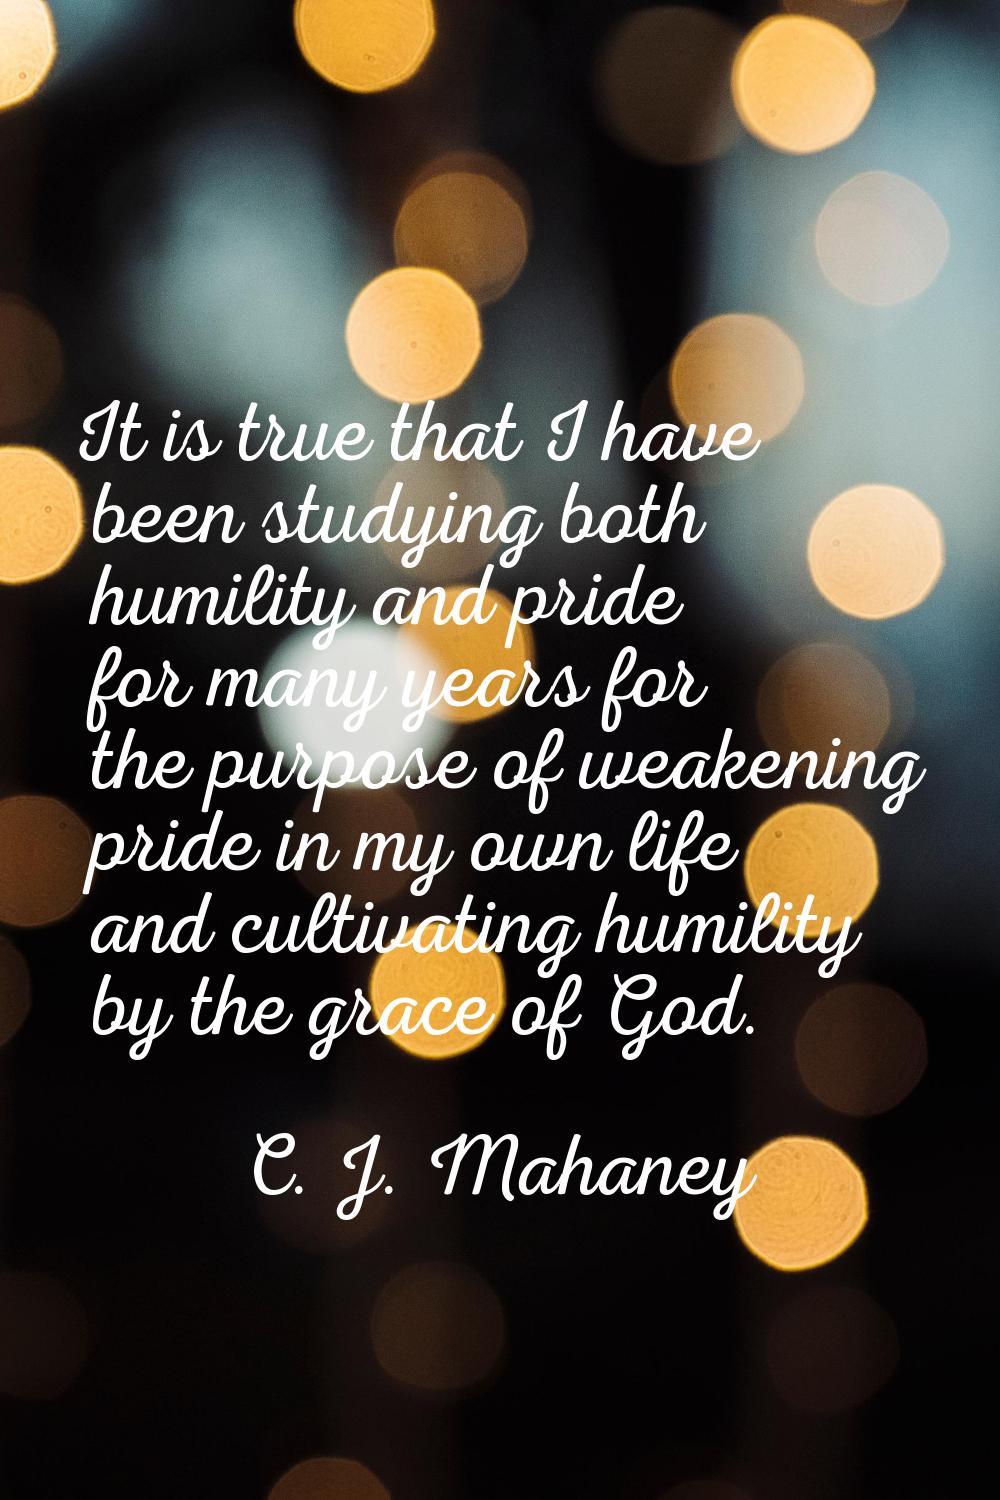 It is true that I have been studying both humility and pride for many years for the purpose of weak